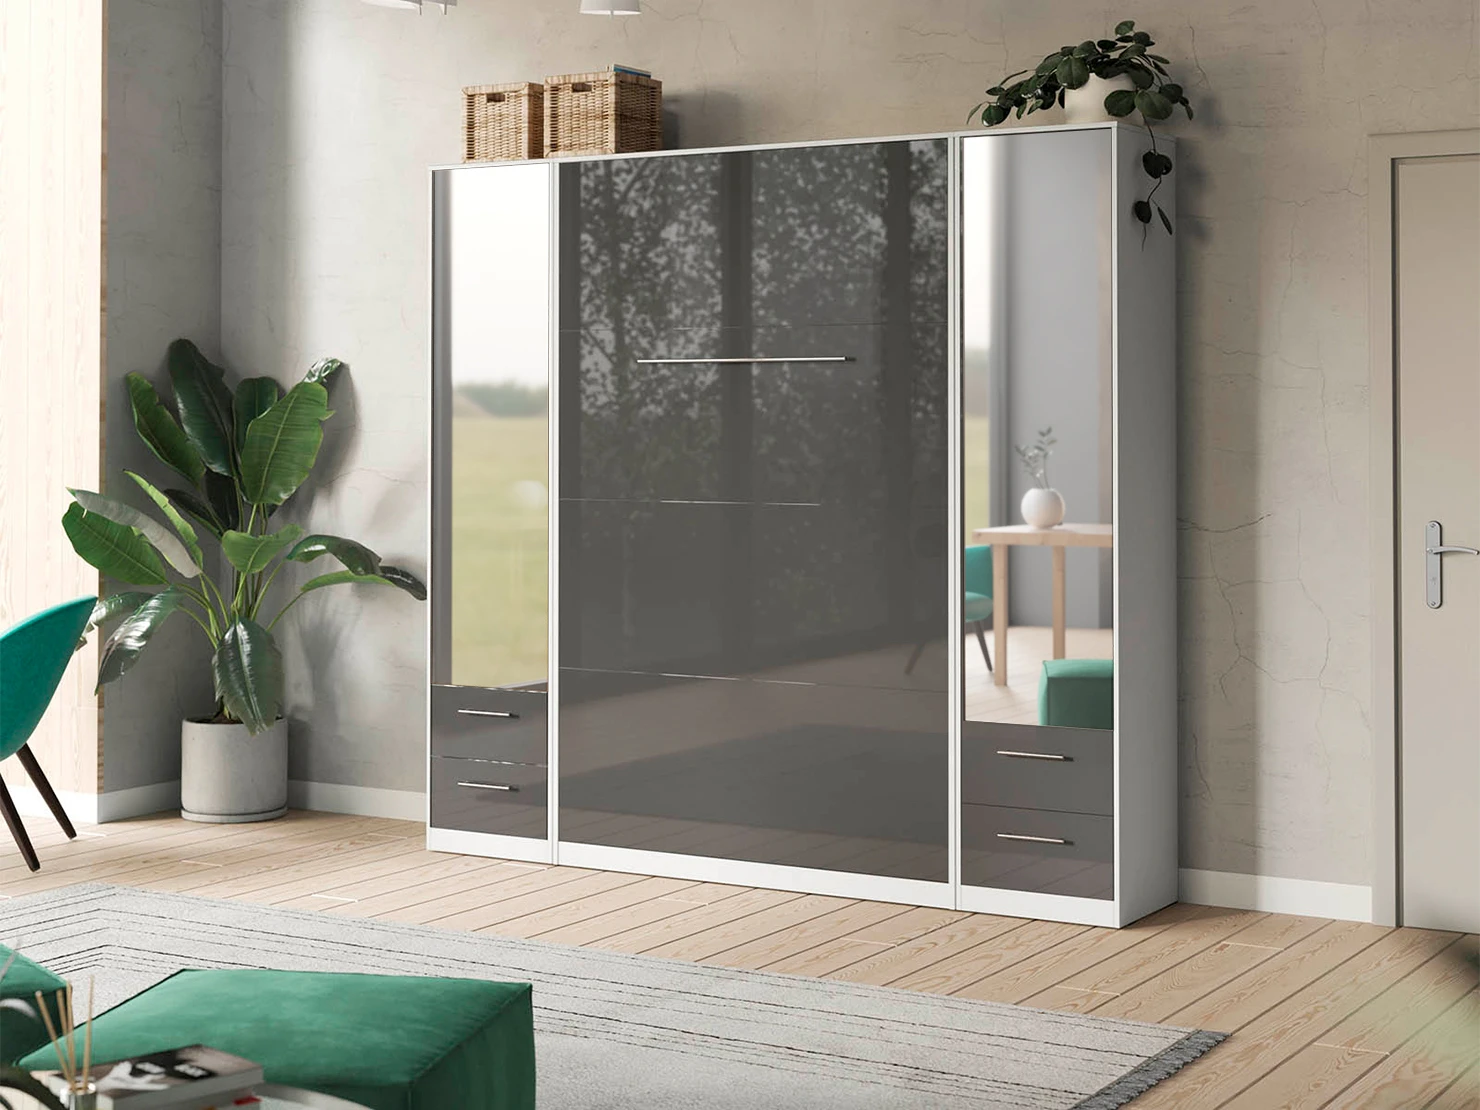 1 Murphy Bed SET 140x200cm Vertical + 2x Cabinets 50cm White/Anthracite Gloss with Mirror